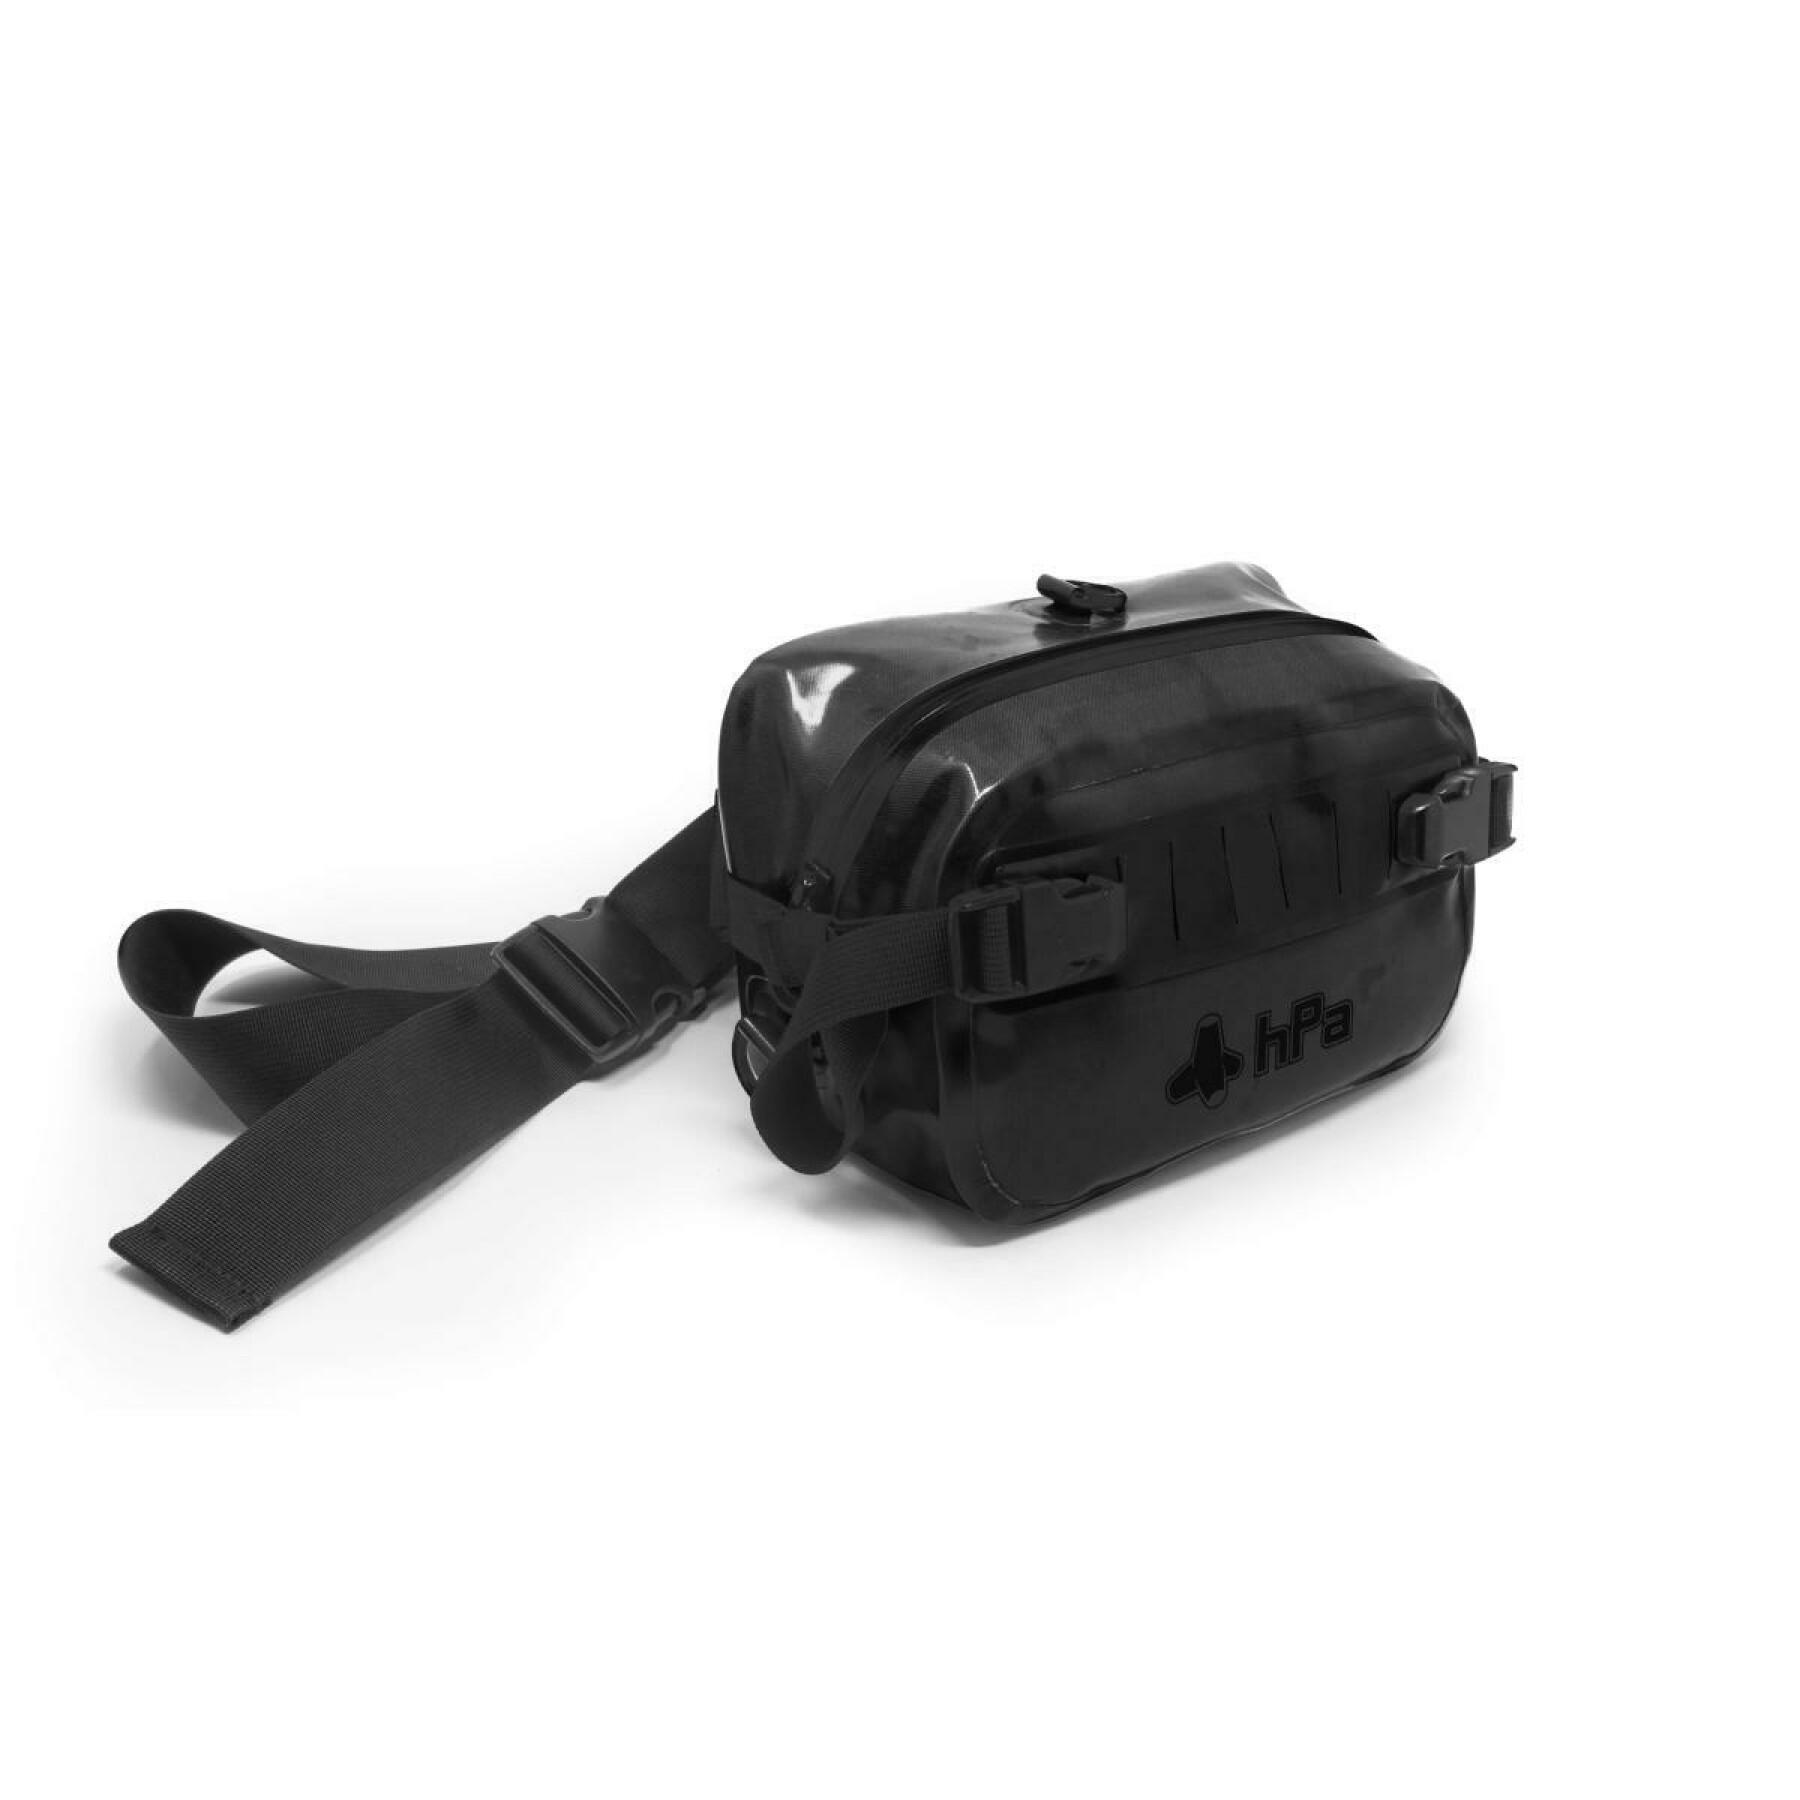 Sacoche ceinture étanche Hpa infladry 5N